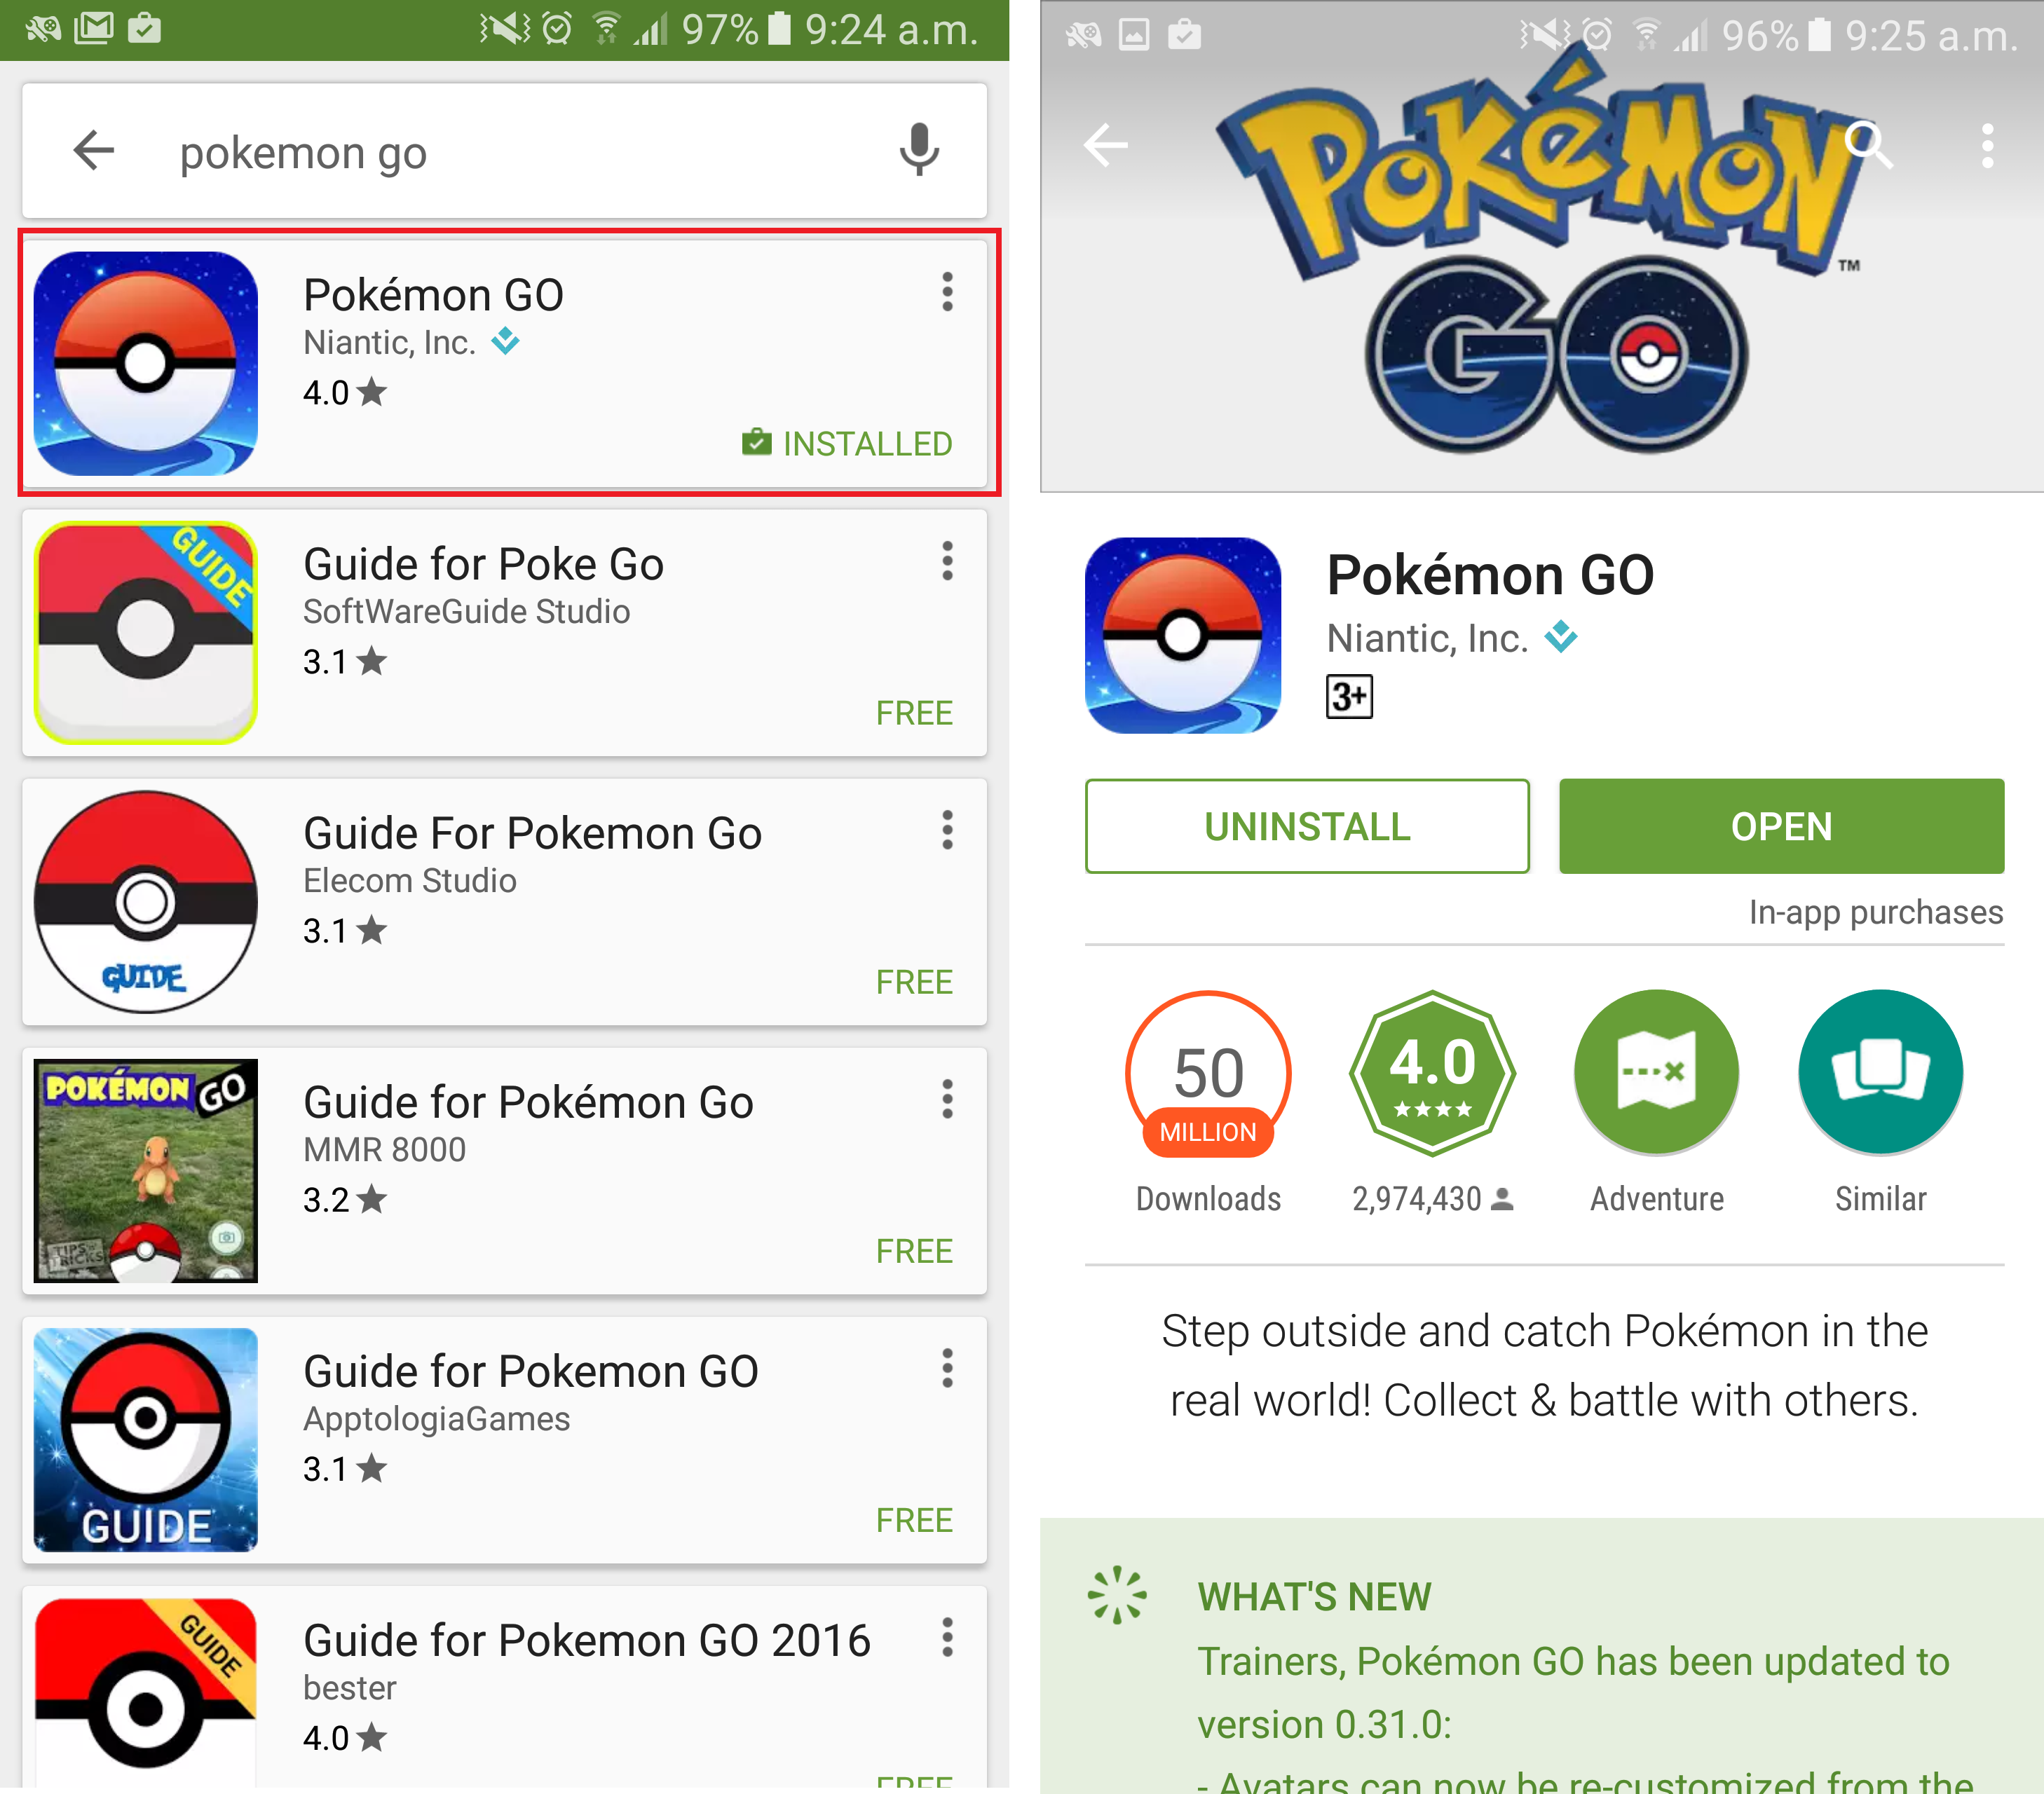 Pokemon Go Finally Is Finally Launched In Malaysia! - World Of Buzz 2